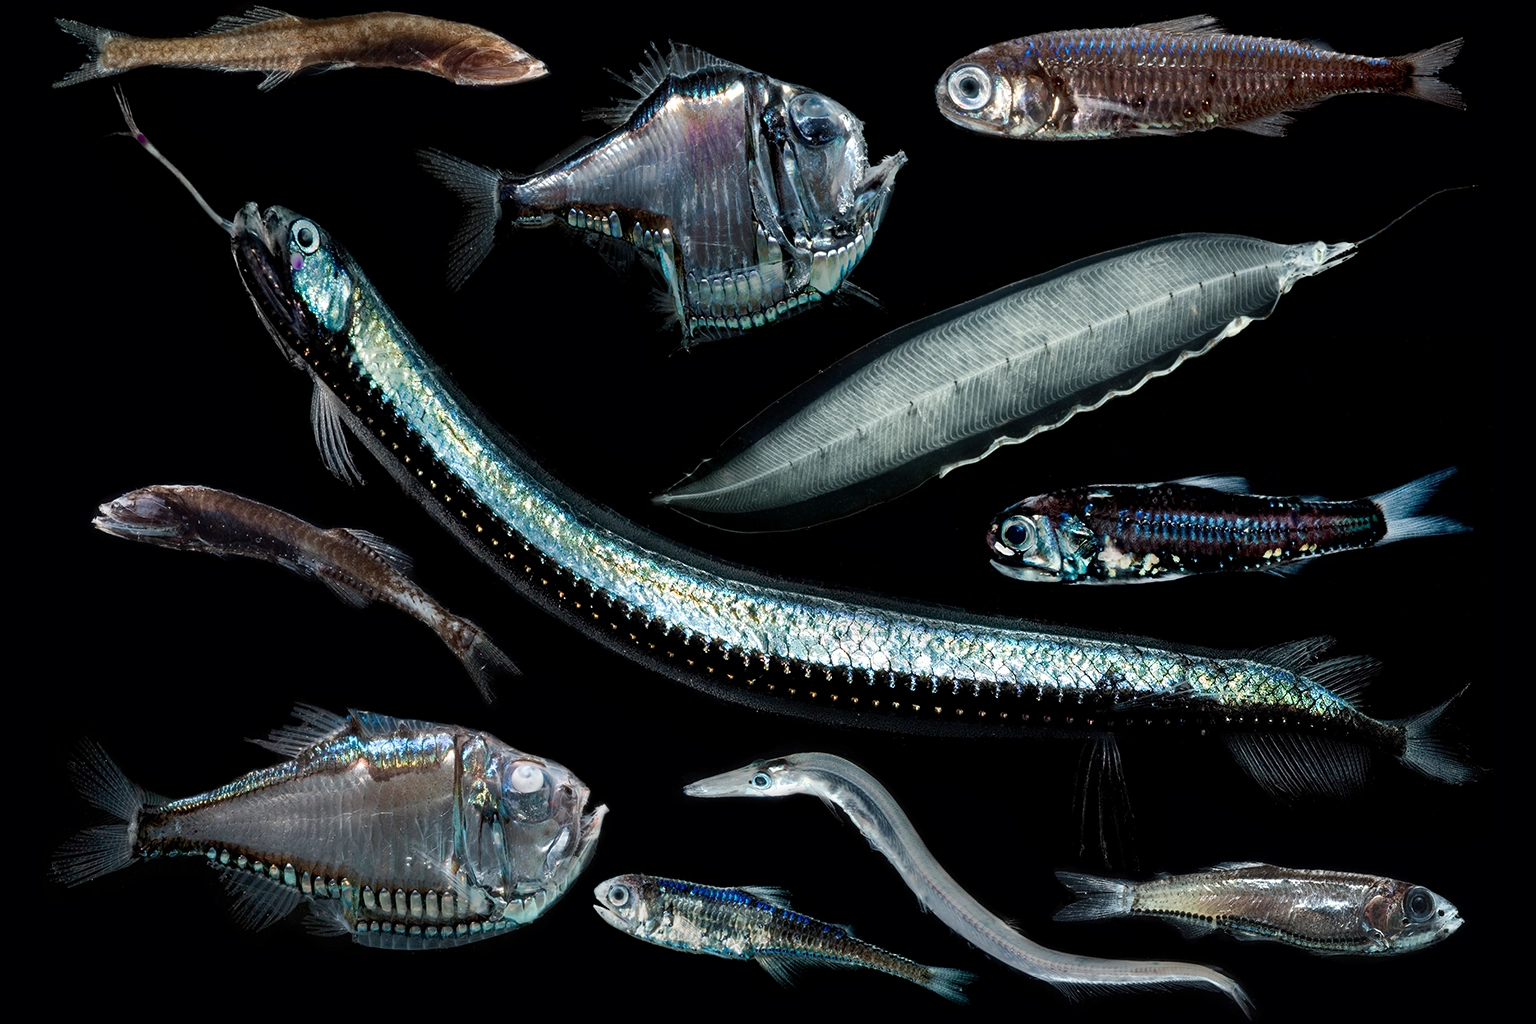 A variety of mesopelagic fish. By breathing and defecating across the ocean depths, mesopelagic fish play a crucial role shuttling carbon into the deep sea, in a process called the biological pump. Image courtesy of Dante Fenolio.